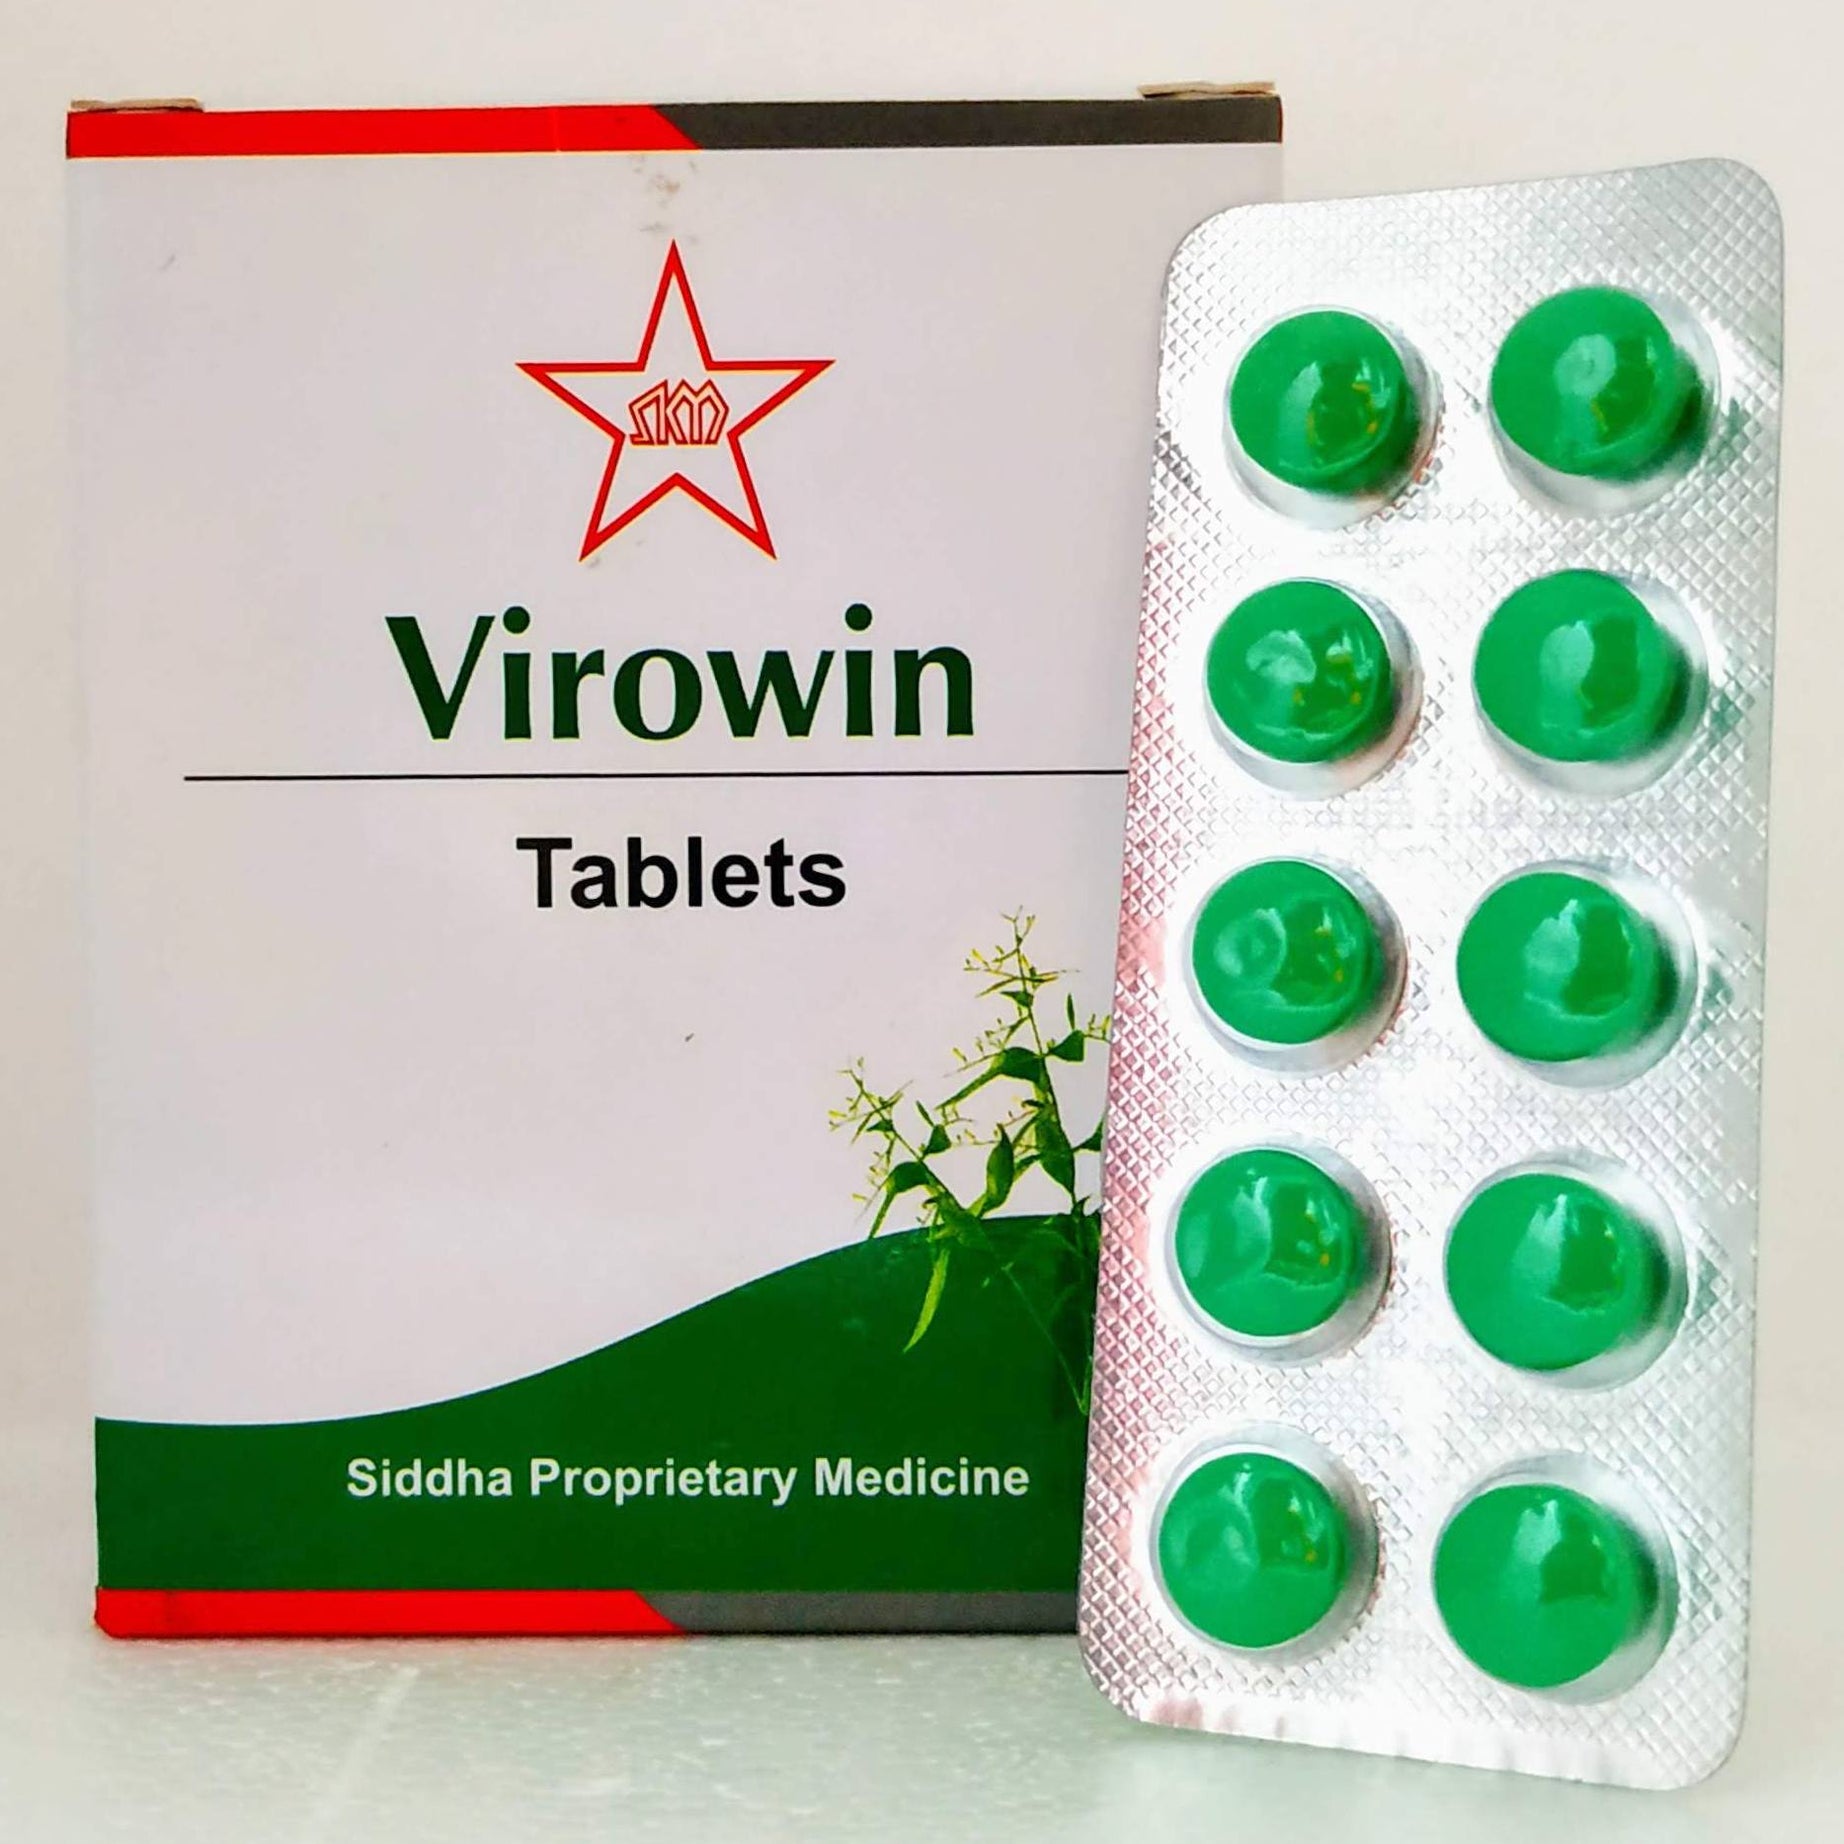 Shop Virowin Tablets - 10Tablets at price 42.00 from SKM Online - Ayush Care